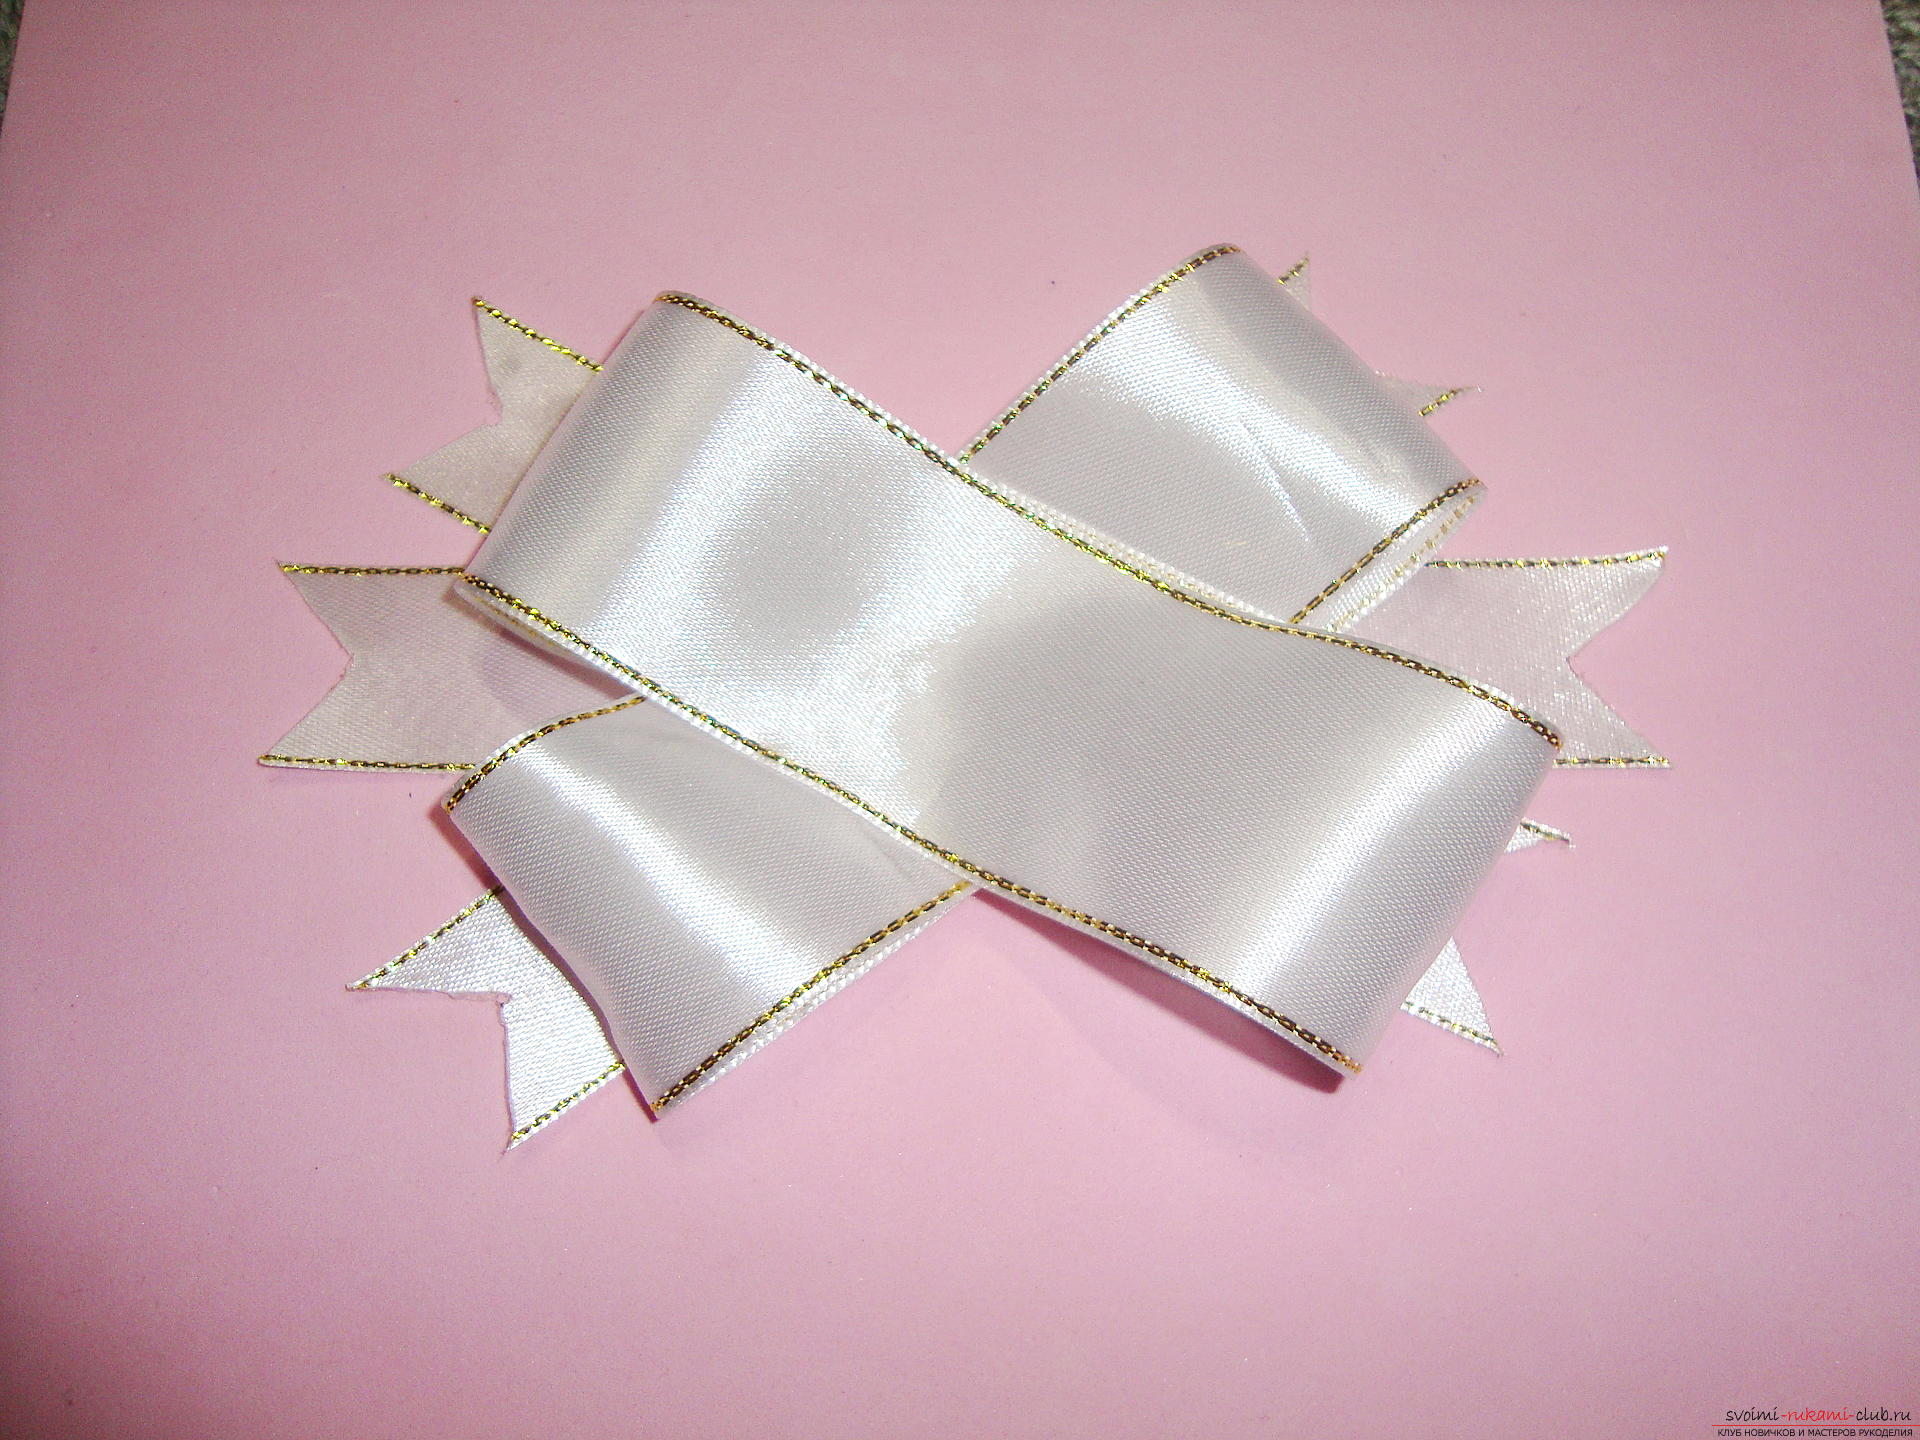 Photo-instruction for making festive bows for girls. Photo Number 11